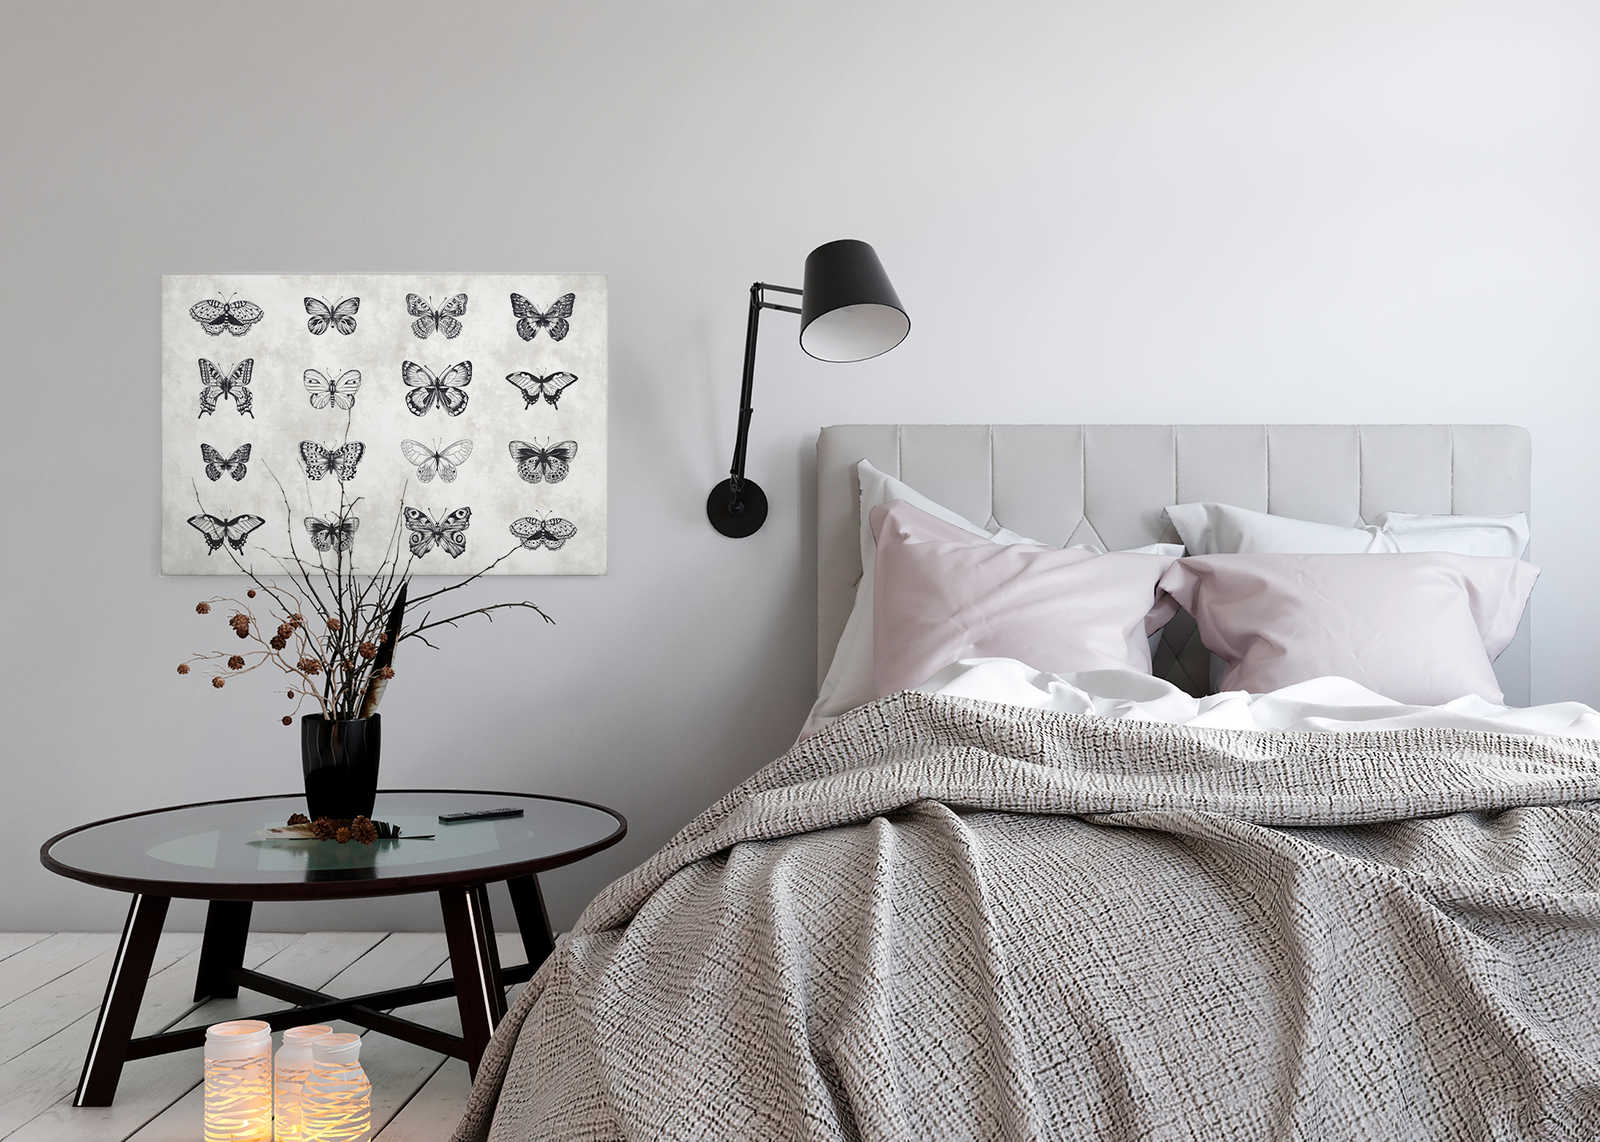             Butterfly Canvas Painting Black & White Drawings - 0.90 m x 0.60 m
        